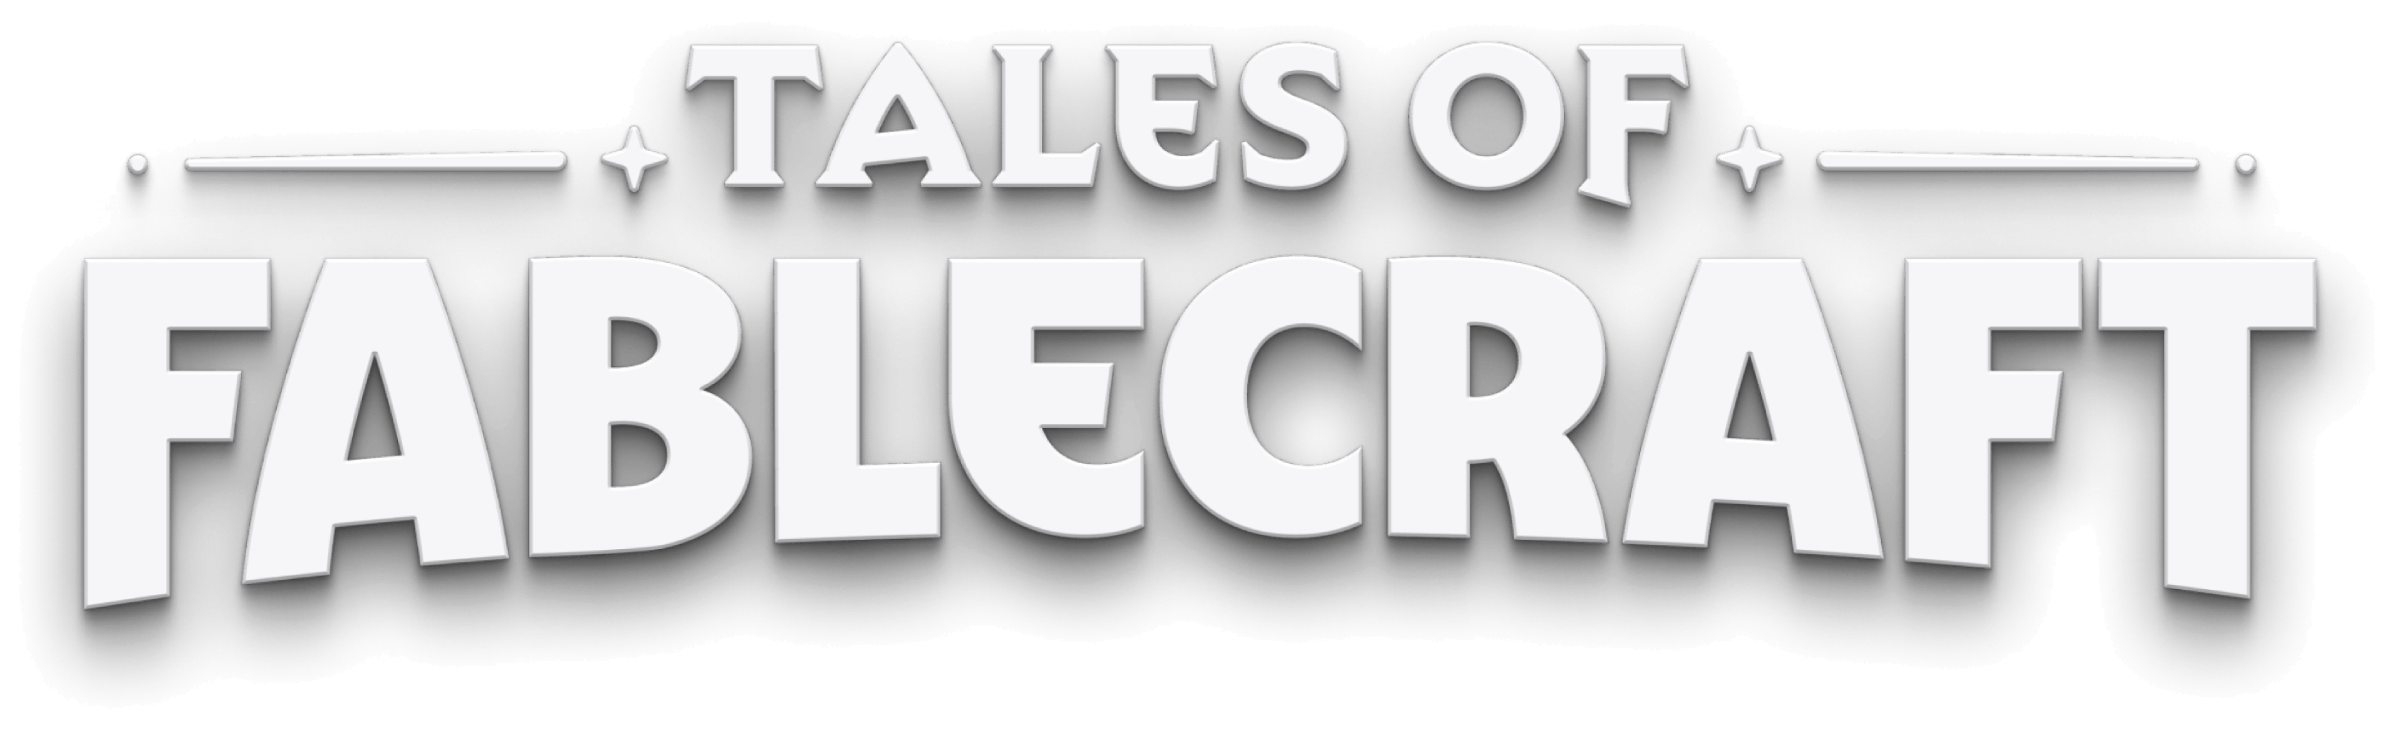 Tales of Fablecraft logo